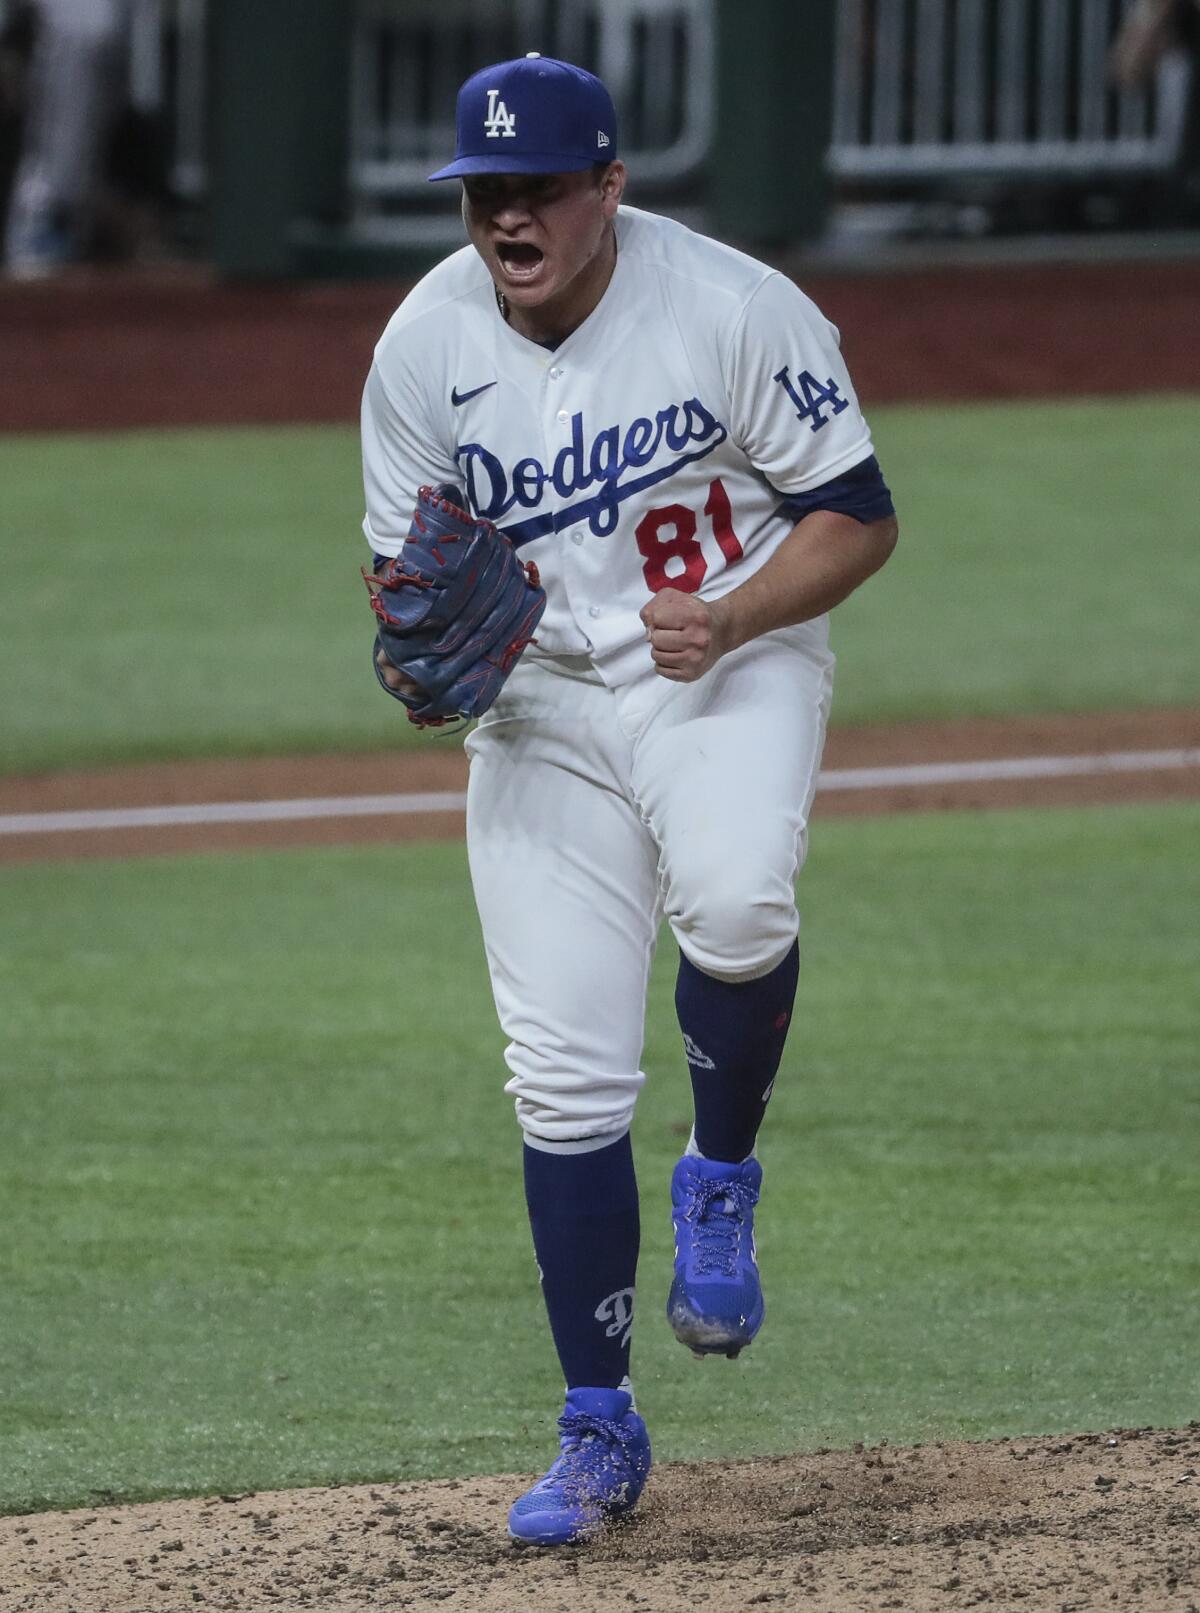 Dodgers reliever Victor Gonzalez celebrates after striking out Atlanta's Charlie Culberson.